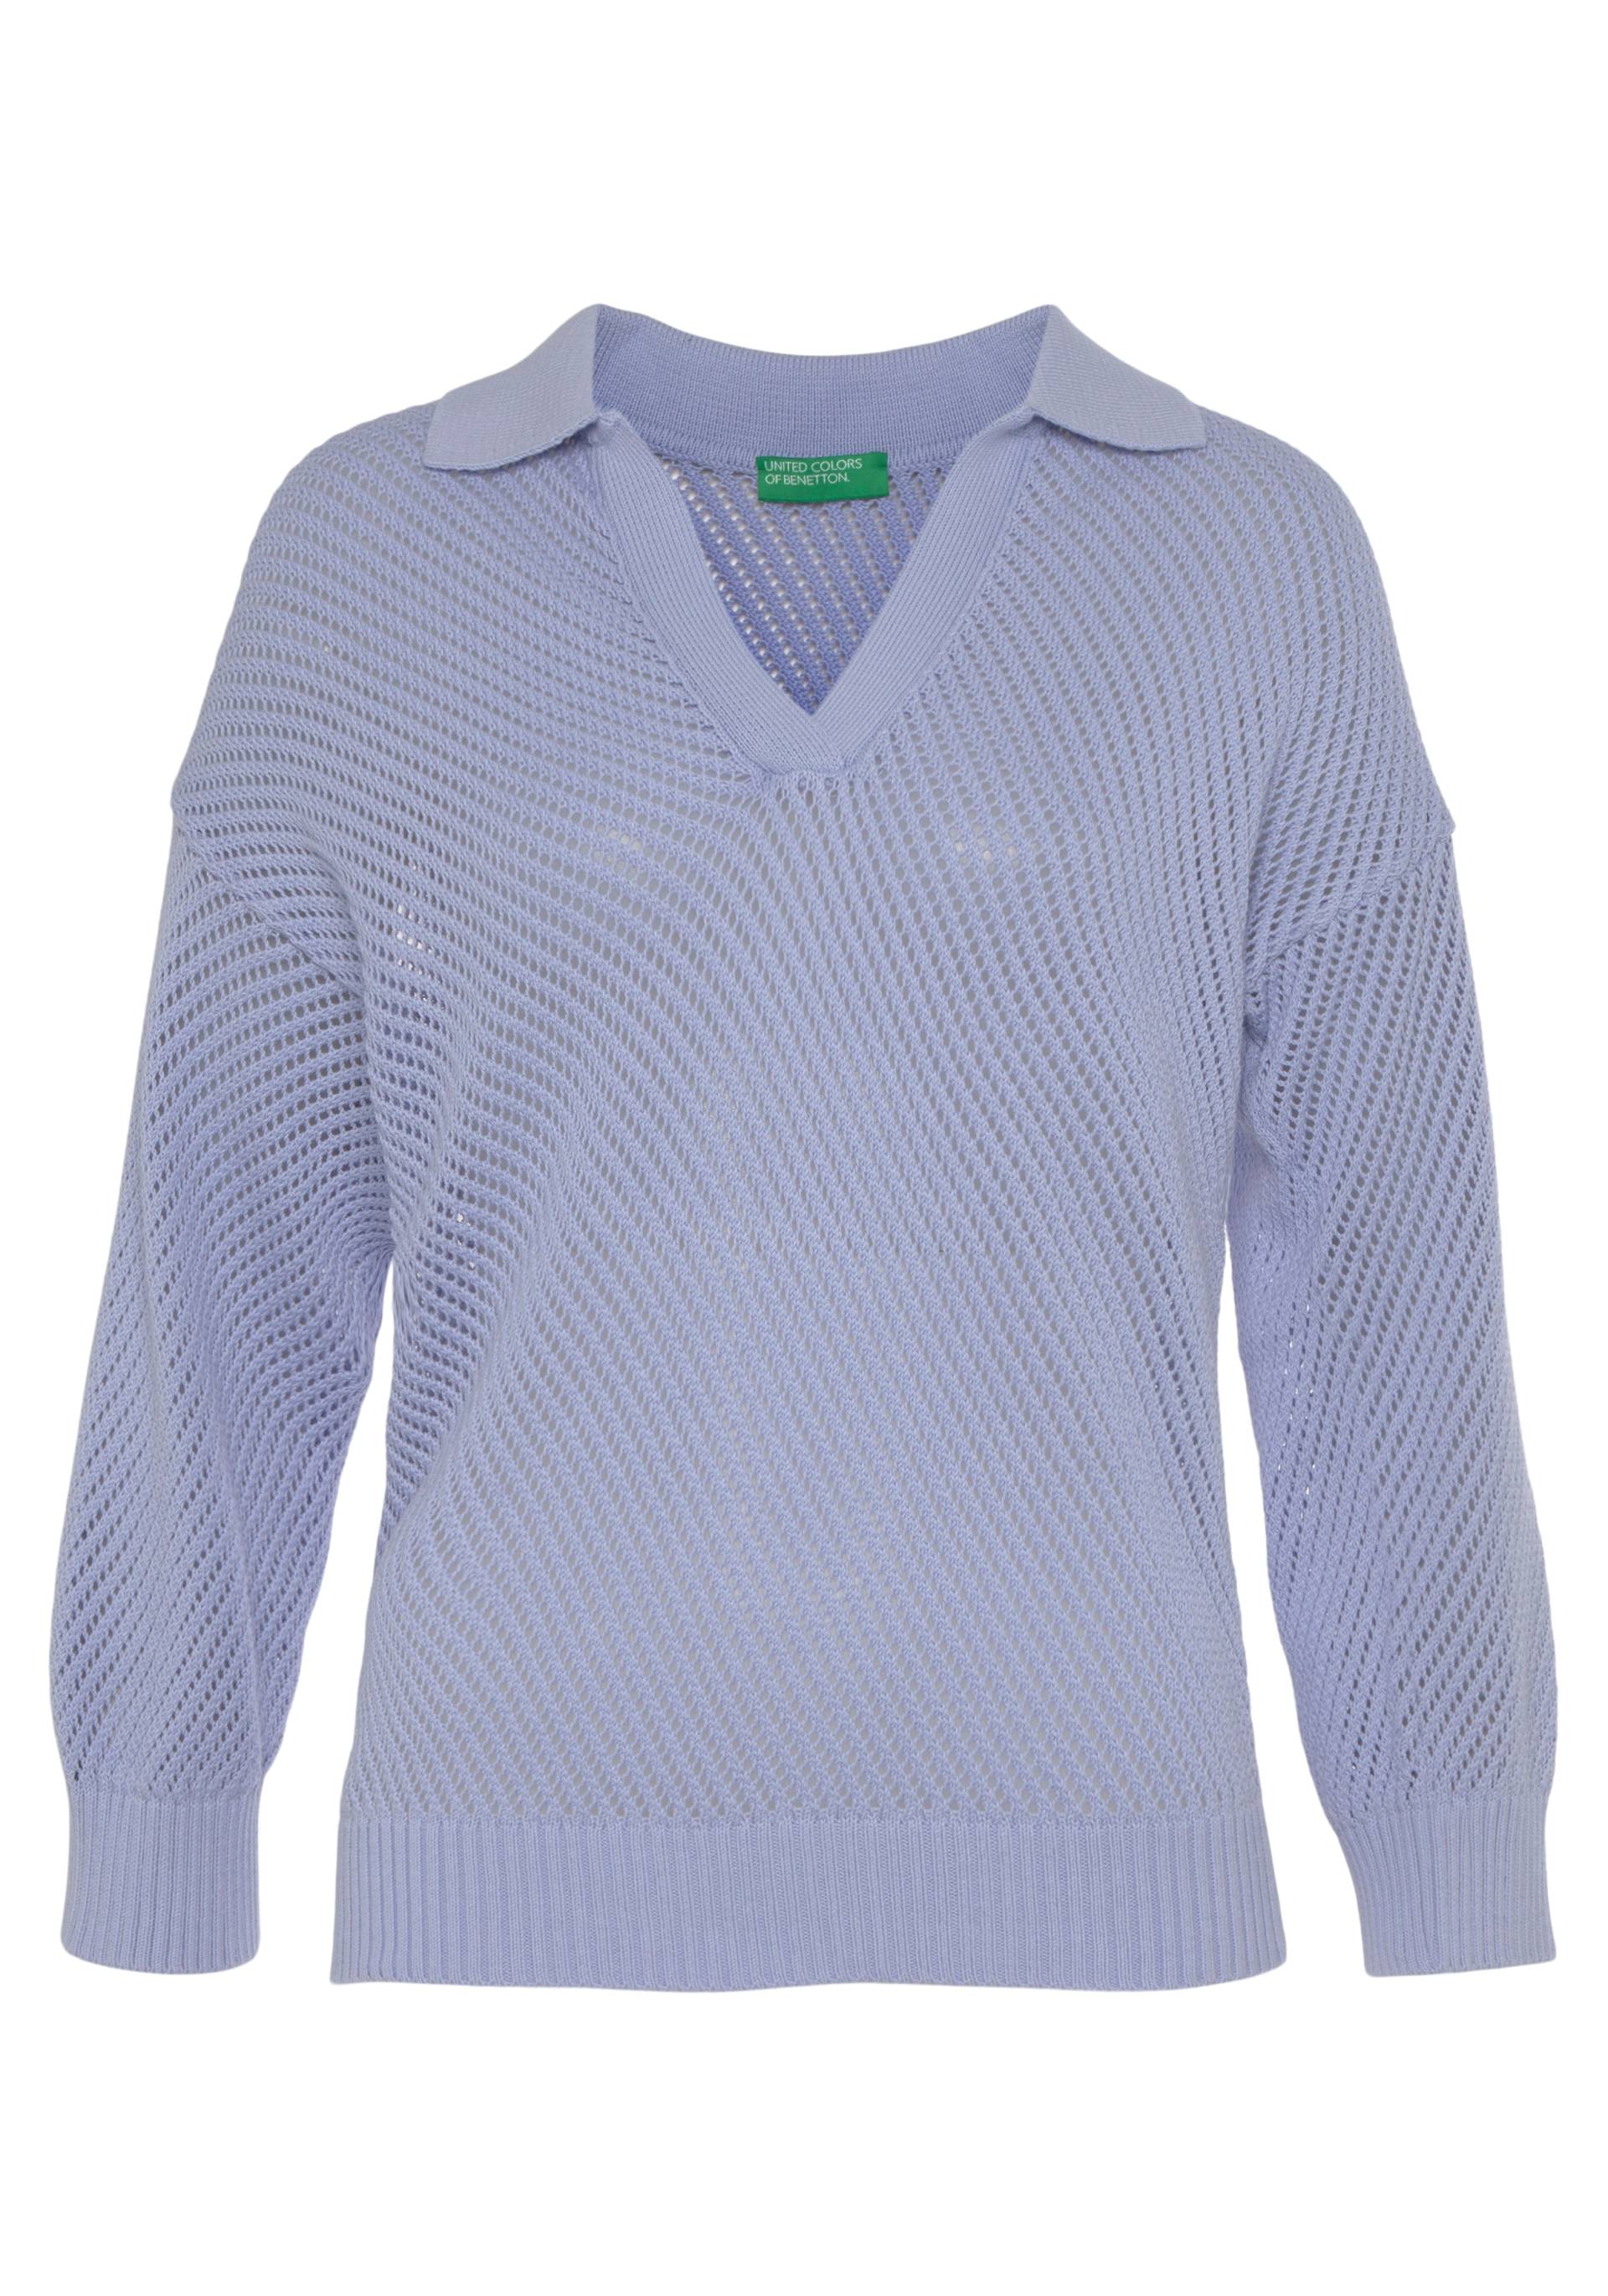 United Colors of Benetton Strickpullover, mit Polo-Strick-Kragen von United Colors of Benetton